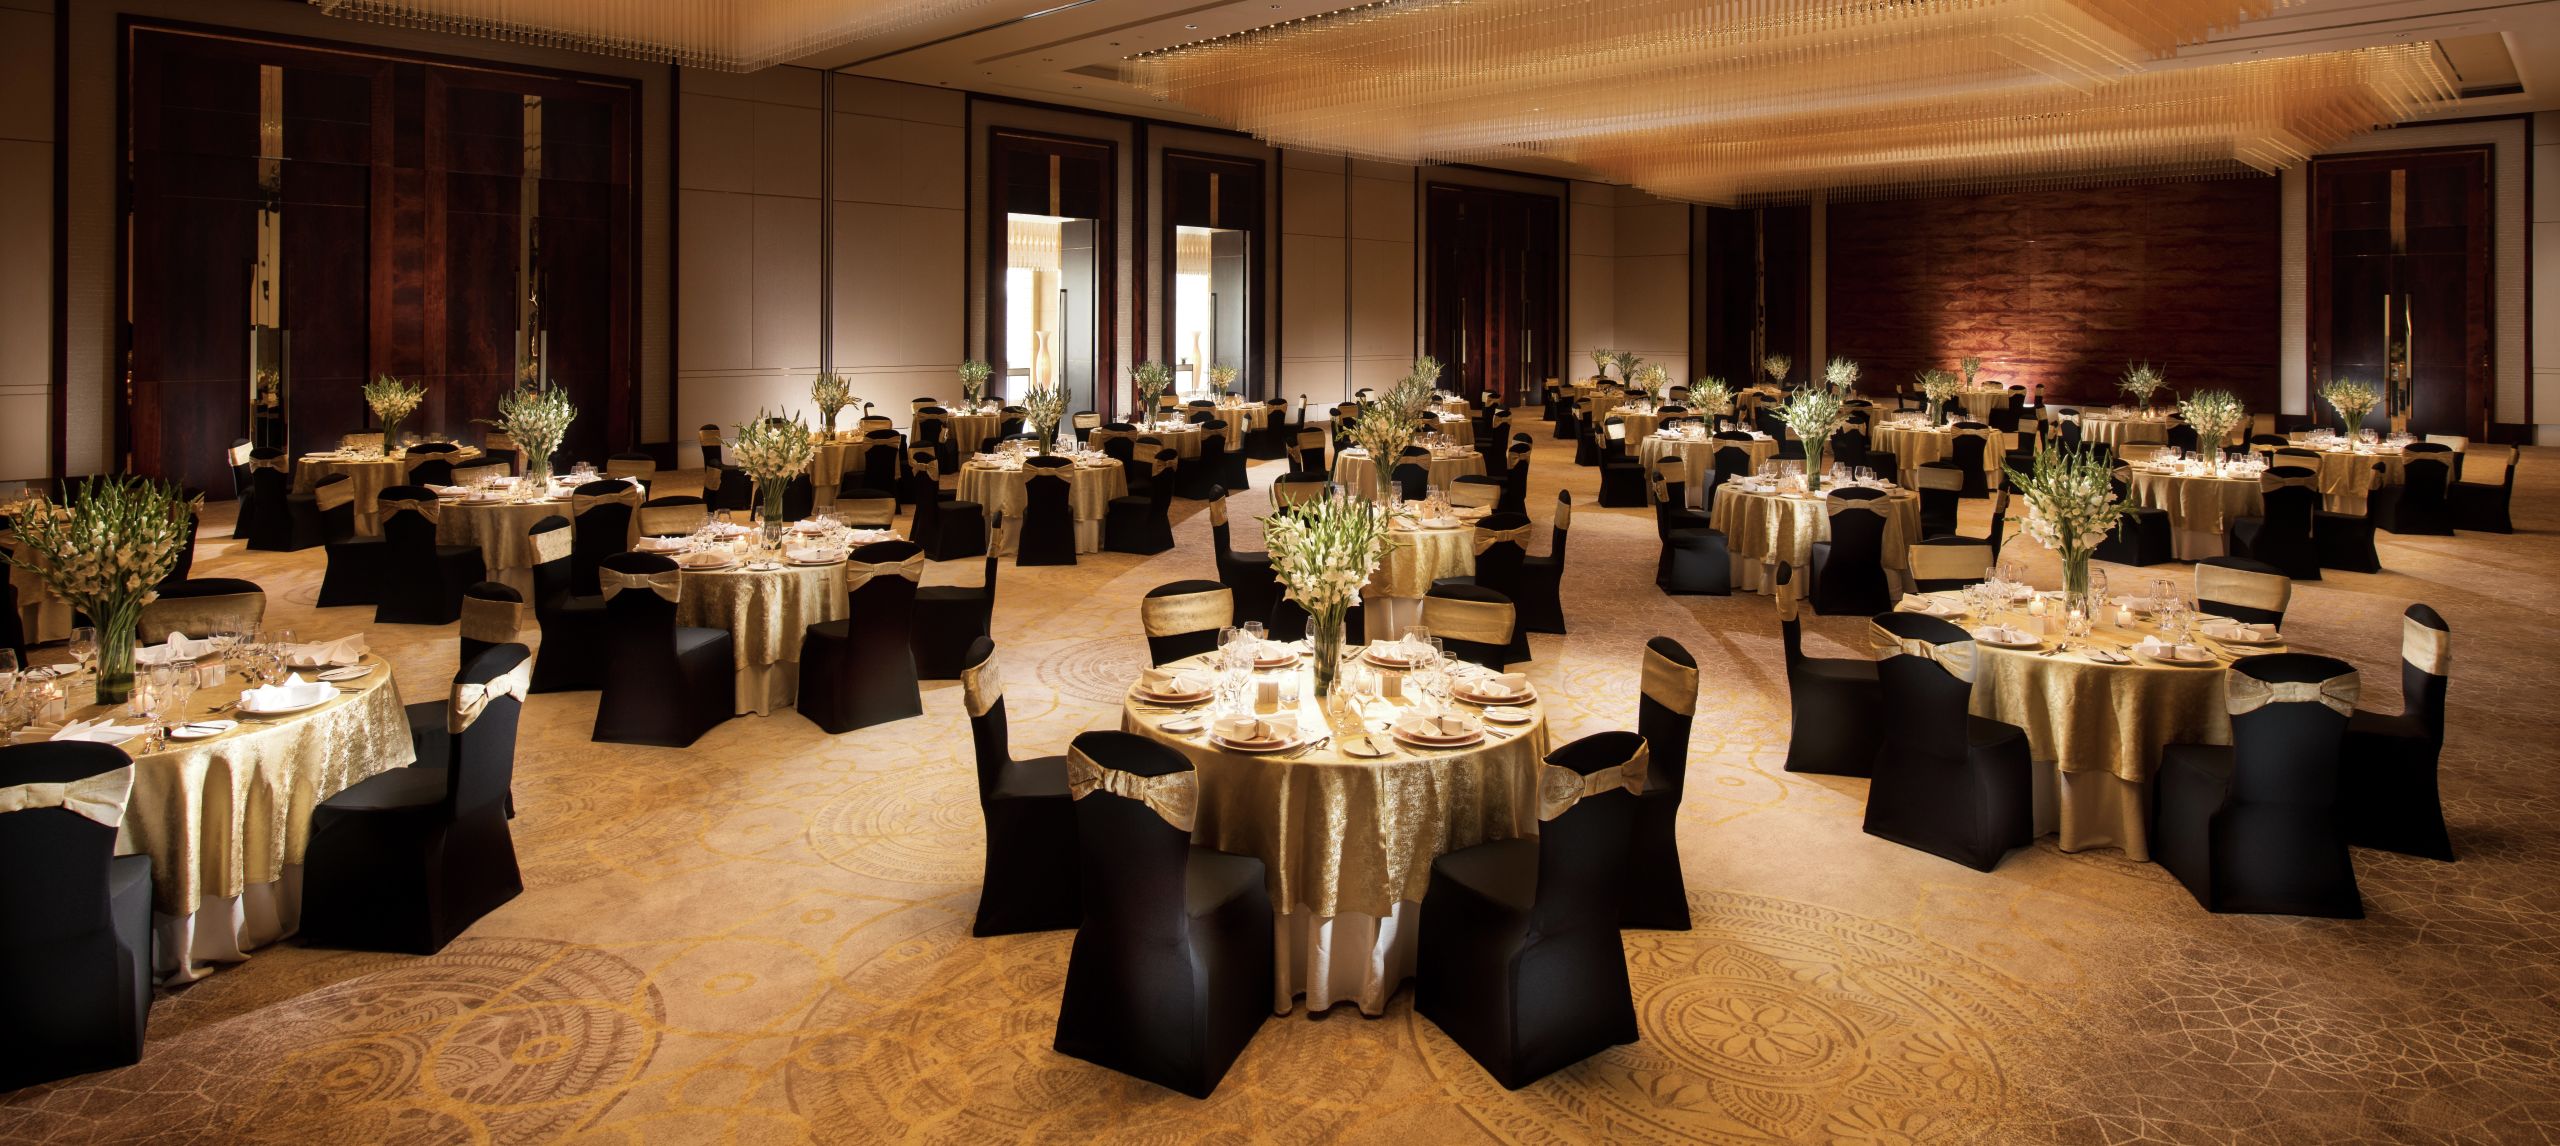 Ballroom Area with Round Tables and Chairs